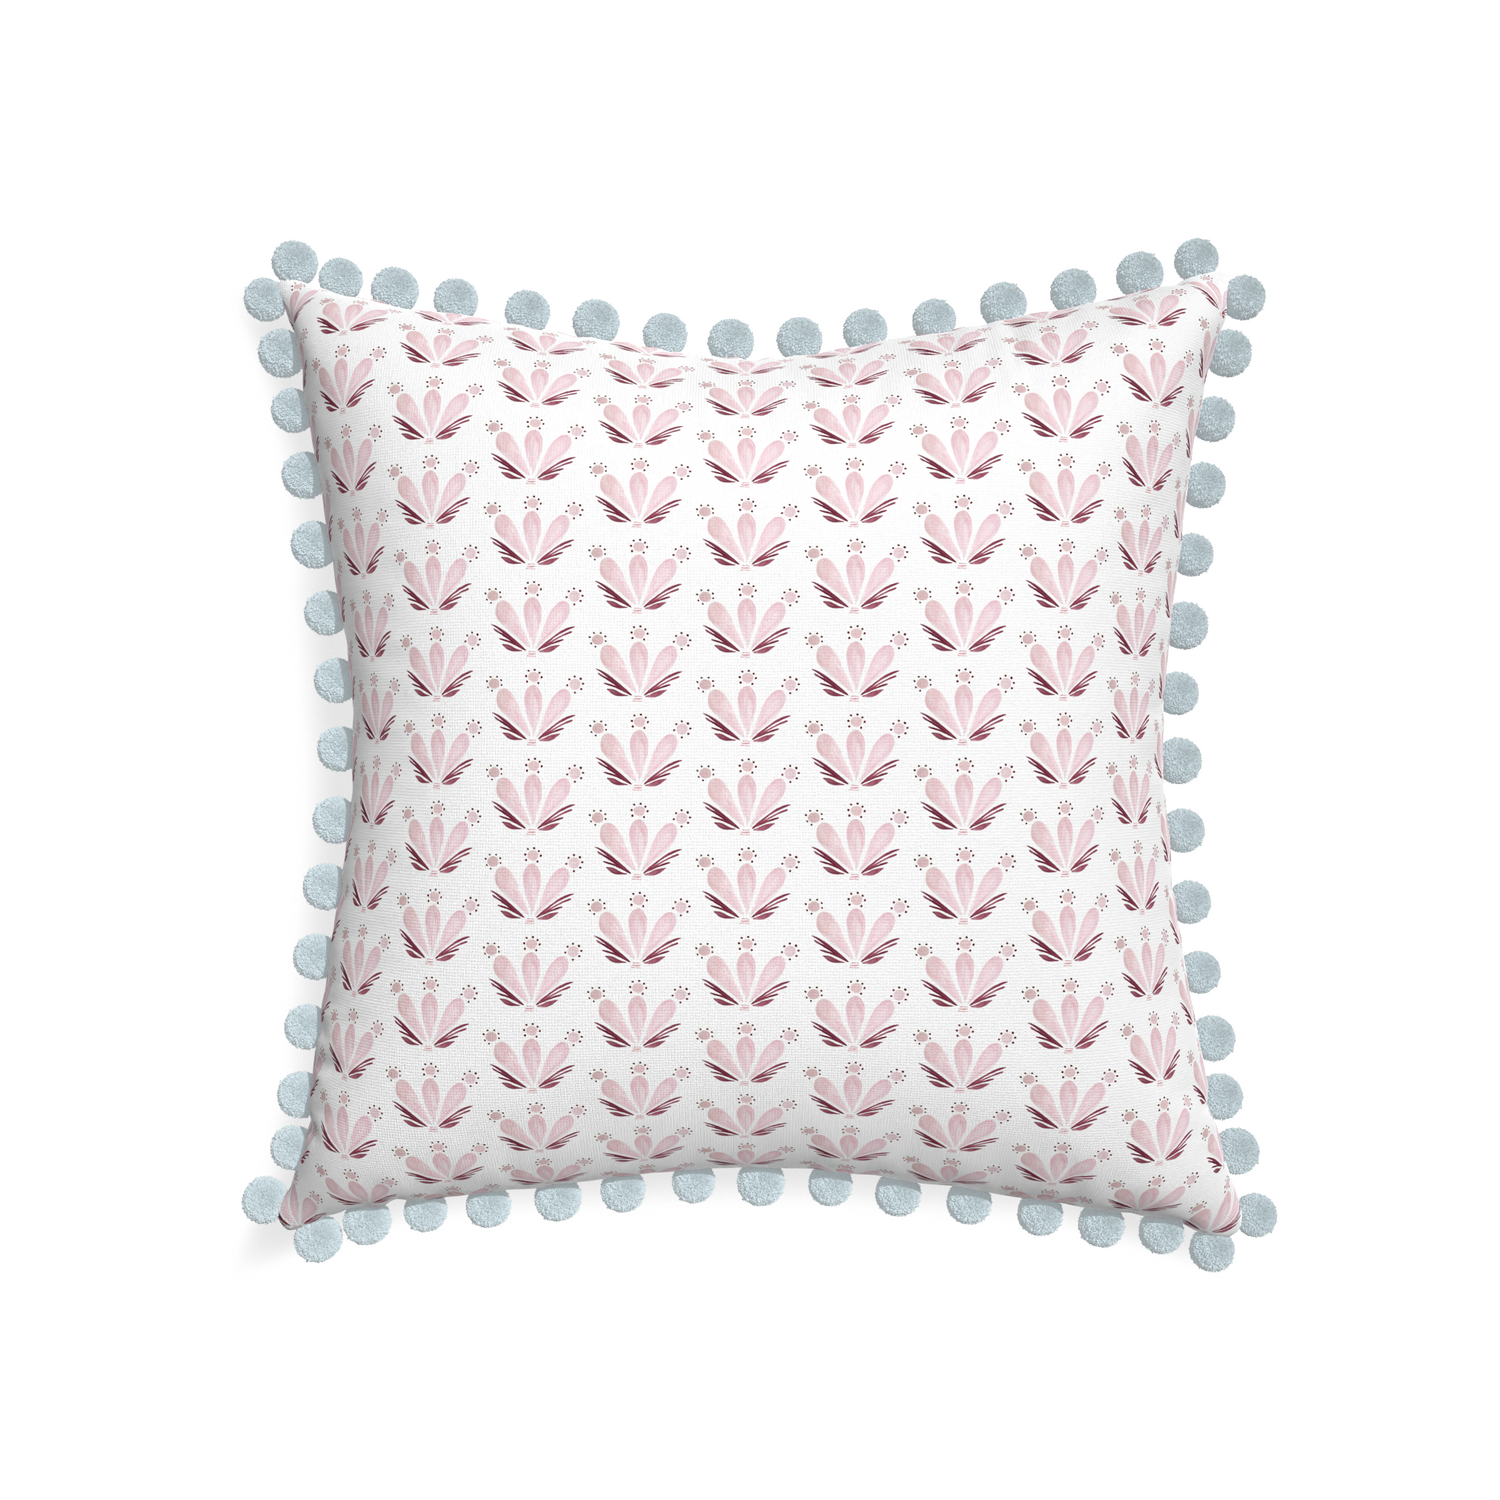 22-square serena pink custom pink & burgundy drop repeat floralpillow with powder pom pom on white background